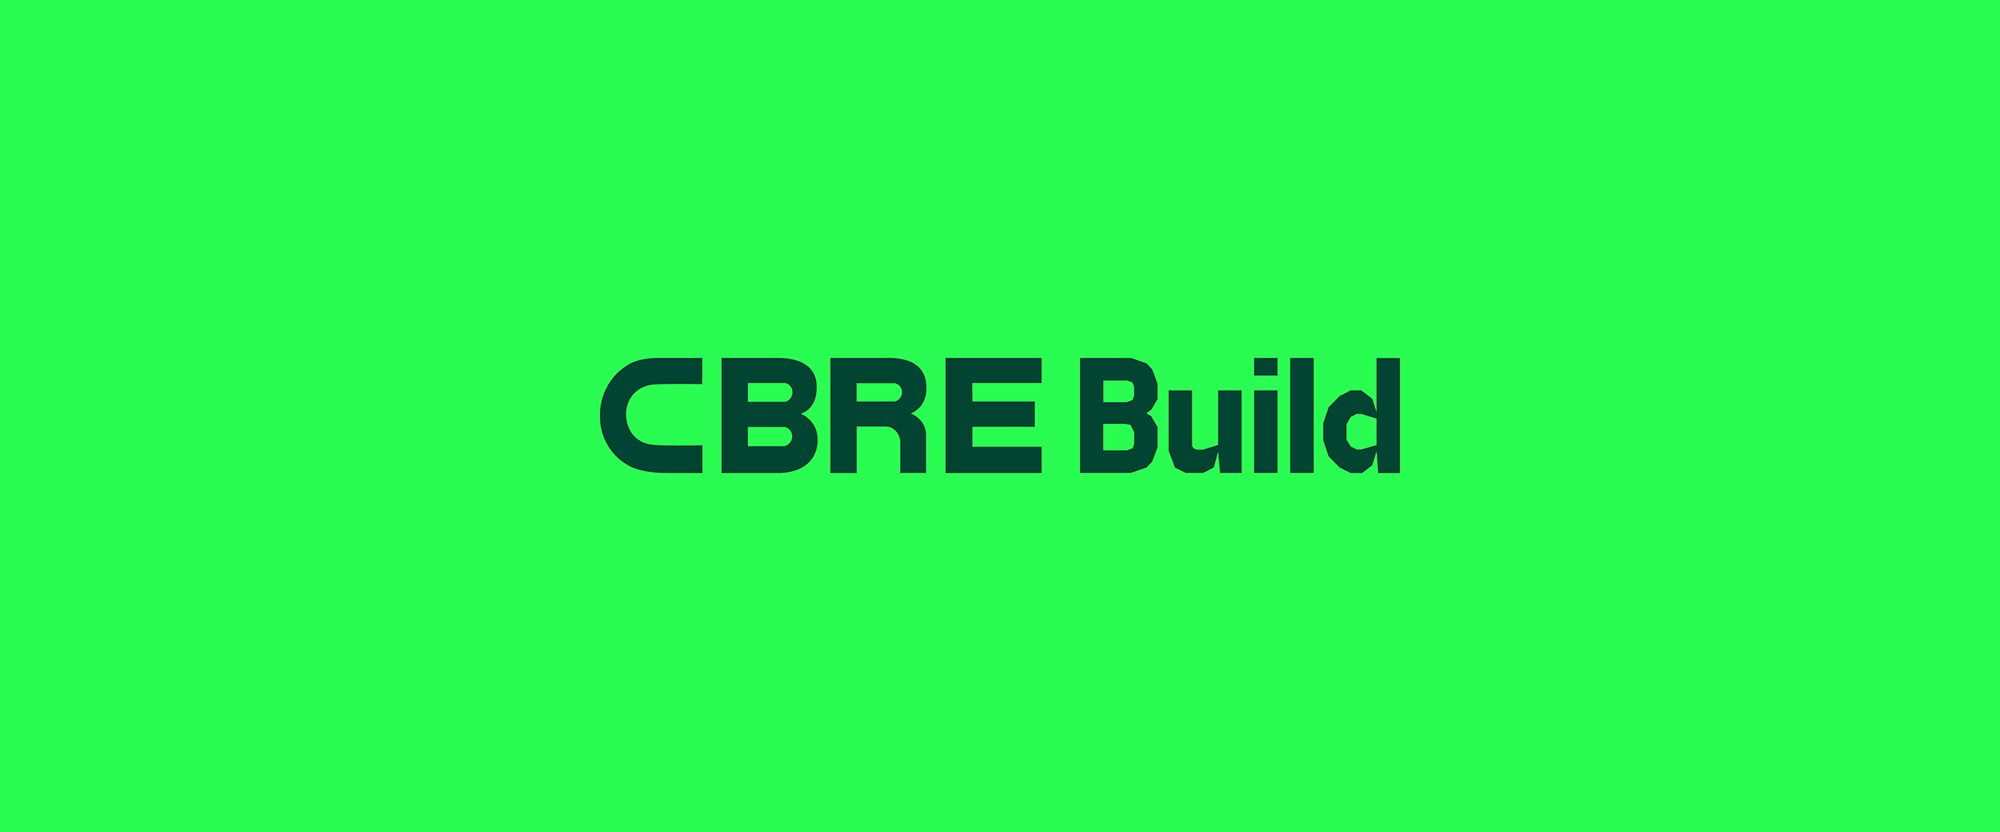 New Logo and Identity for CBRE Build done In-house